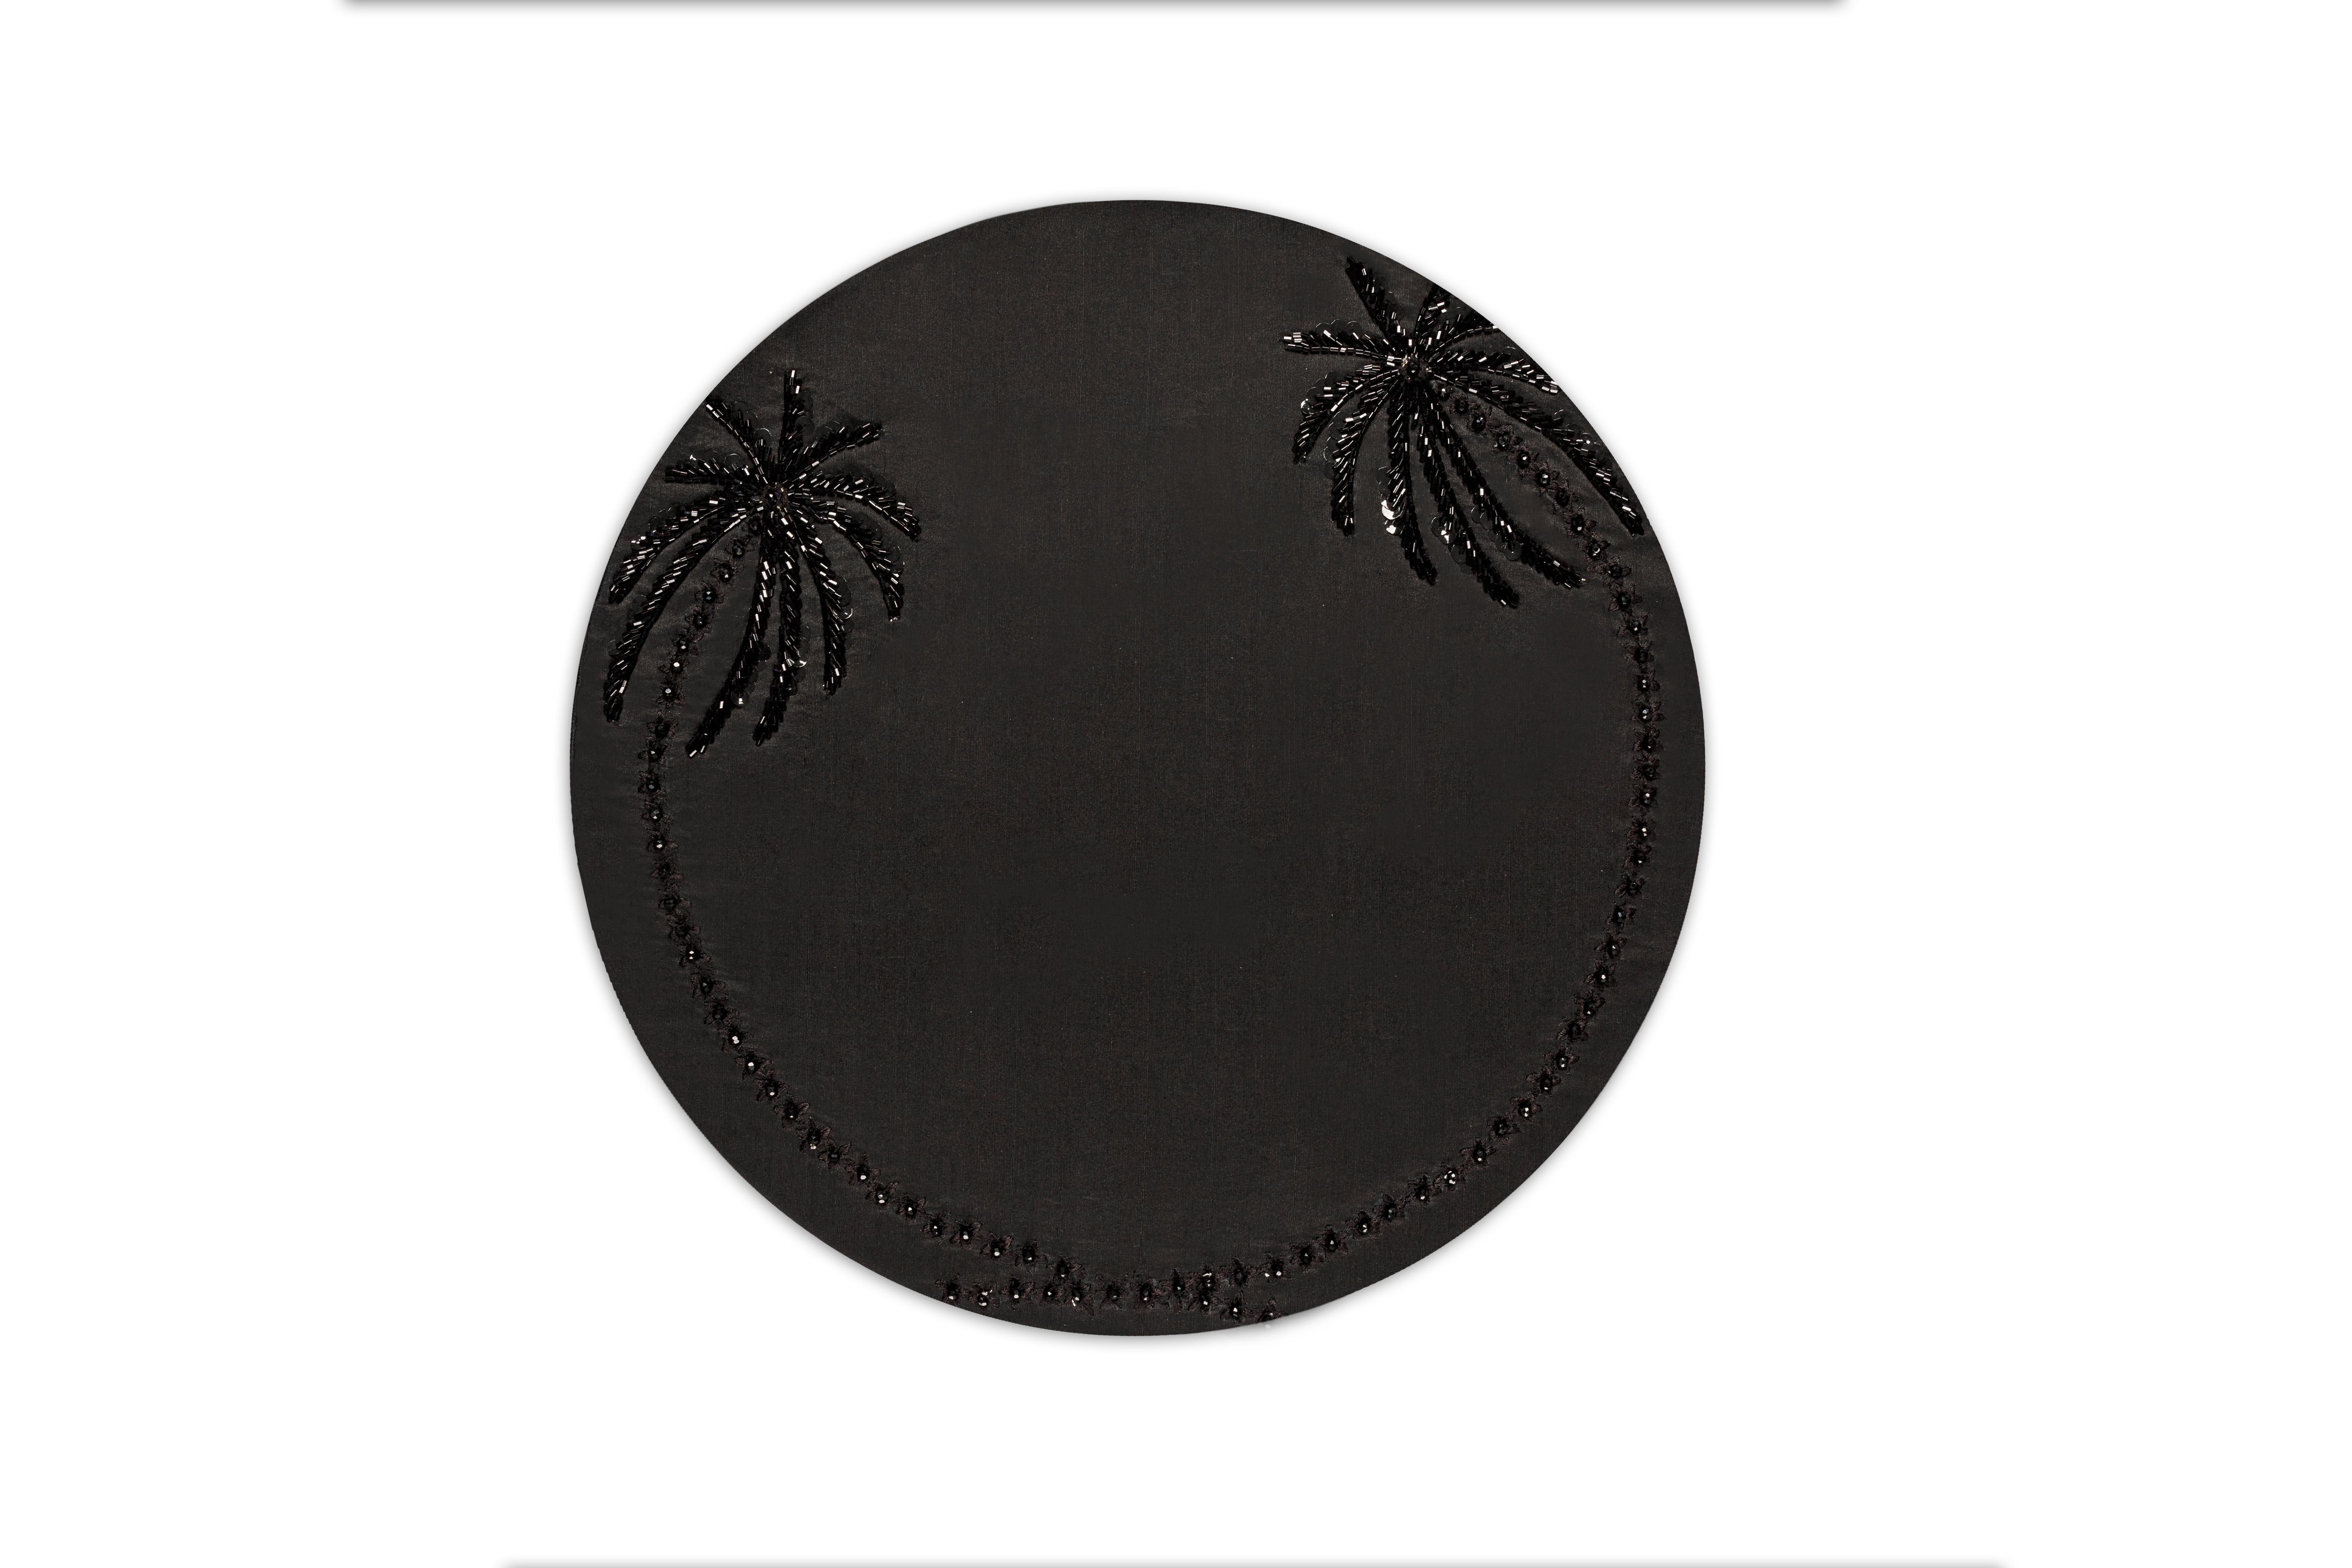 All hand made, Les Palmier placemat marries two palm trees to create a magnificent halo around your dinnerware. The trunks are intricately embroidered with black threads while the palm leaves are fashioned with beadwork.